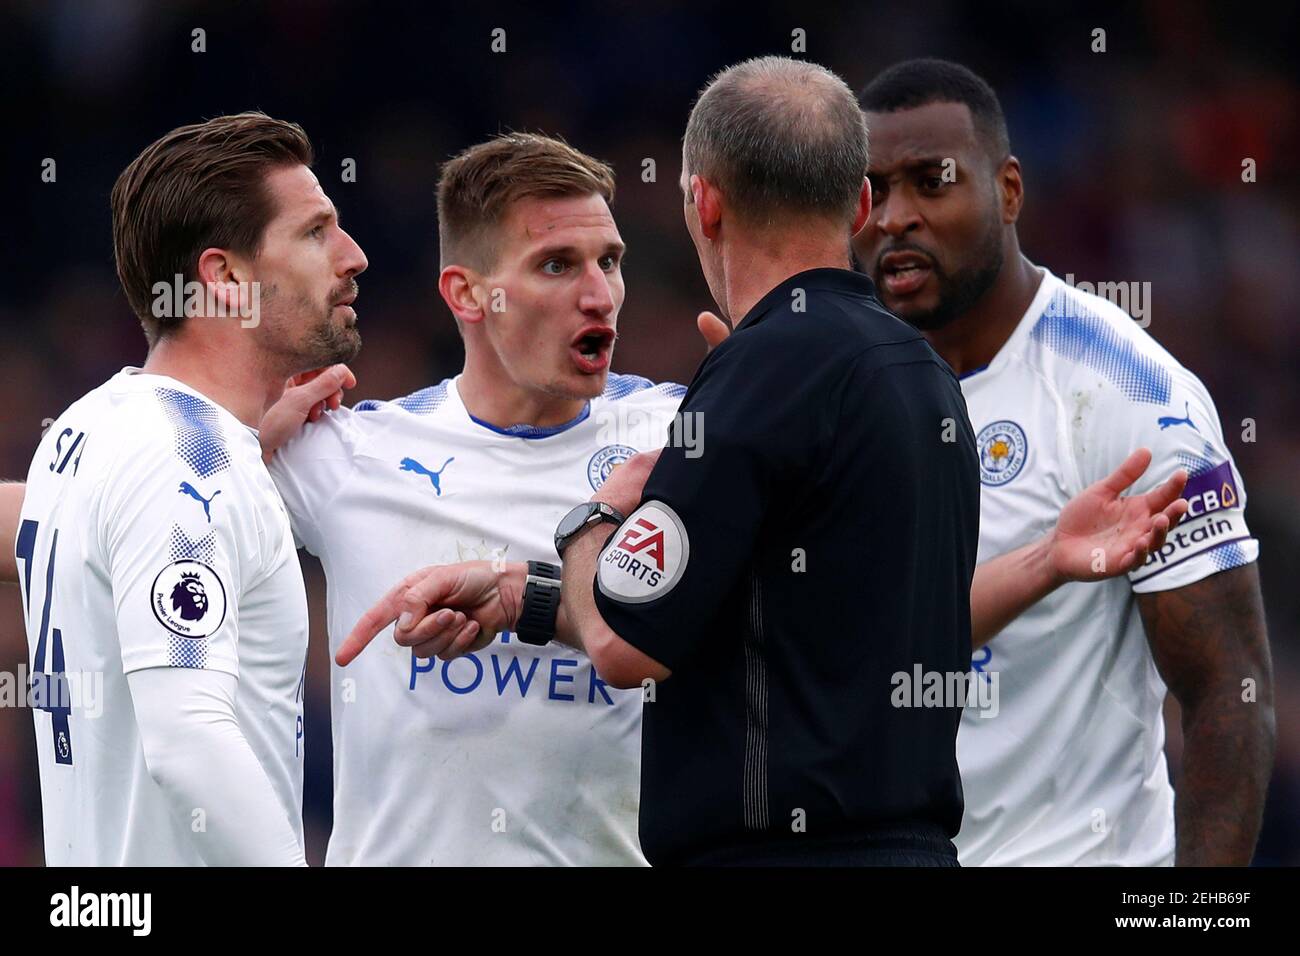 Soccer Football - Premier League - Crystal Palace v Leicester City - Selhurst Park, London, Britain - April 28, 2018   Leicester City's Marc Albrighton reacts after being sent off by referee Mike Dean as Adrien Silva and Wes Morgan look on   REUTERS/Eddie Keogh    EDITORIAL USE ONLY. No use with unauthorized audio, video, data, fixture lists, club/league logos or 'live' services. Online in-match use limited to 75 images, no video emulation. No use in betting, games or single club/league/player publications.  Please contact your account representative for further details. Stock Photo